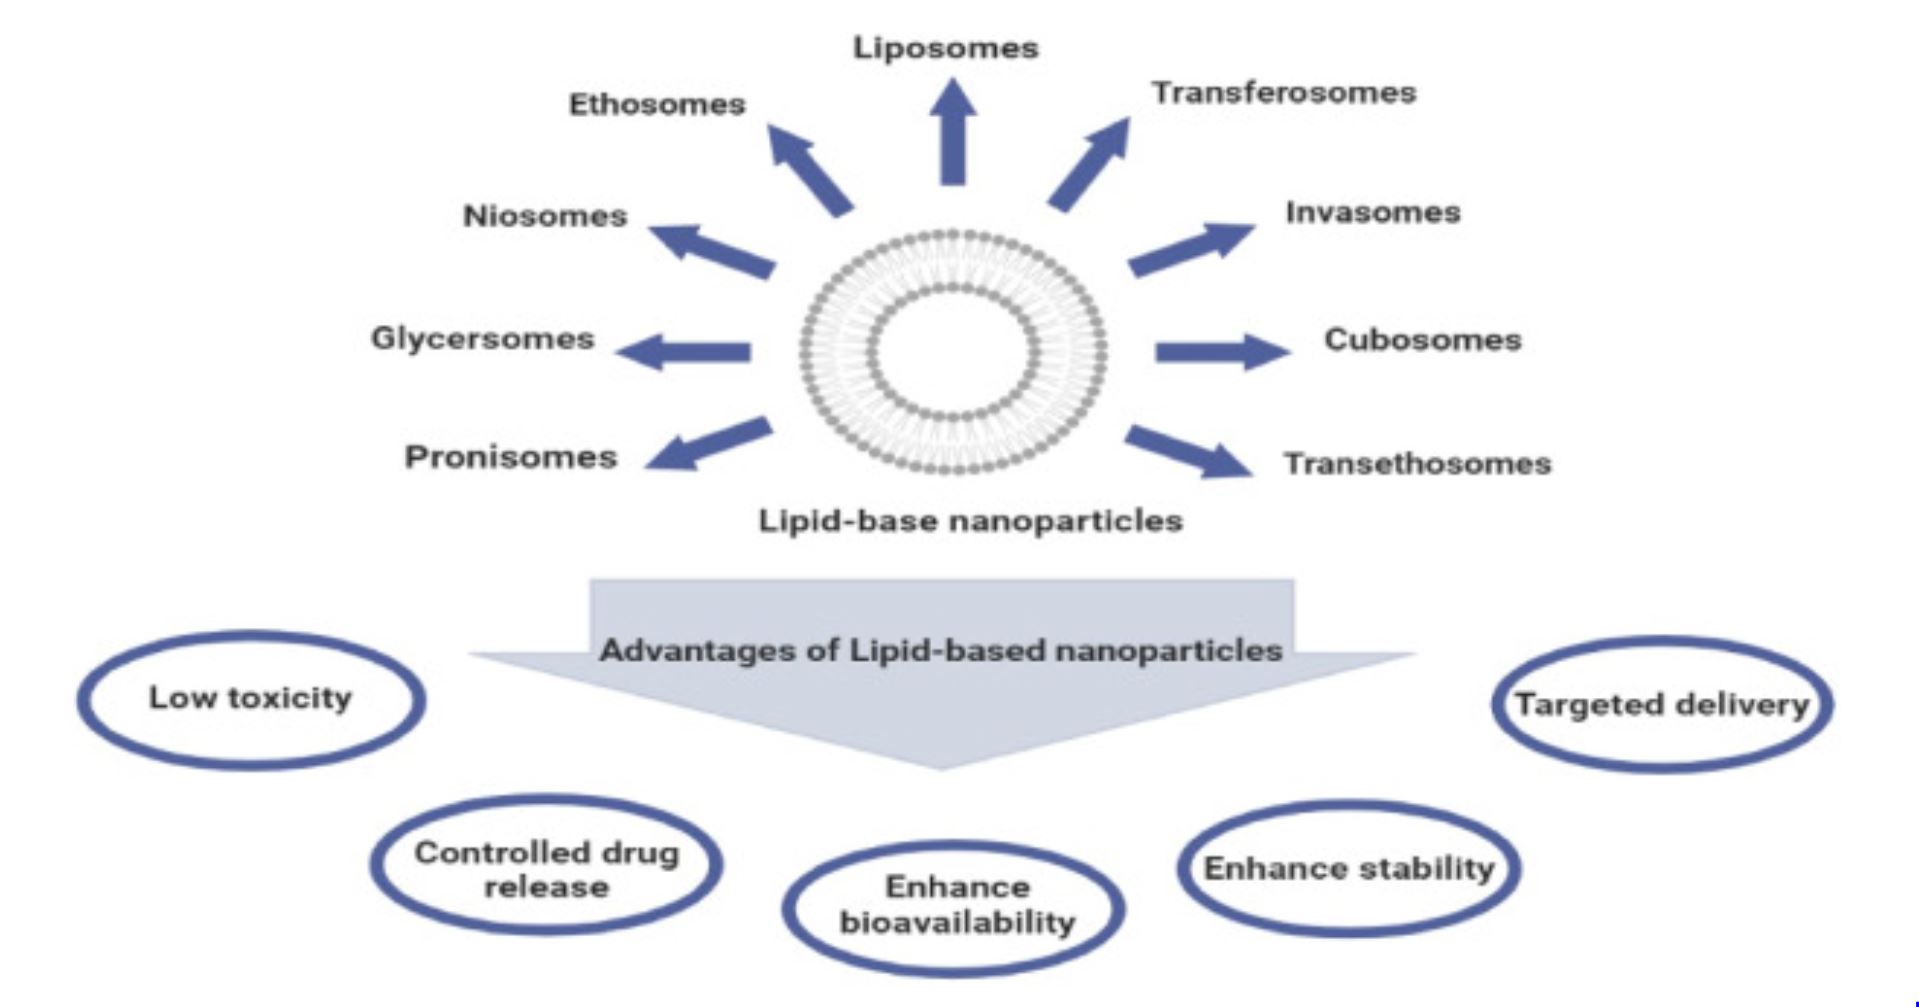 Lipid-based nanoparticles as a promising treatment for the skin cancer